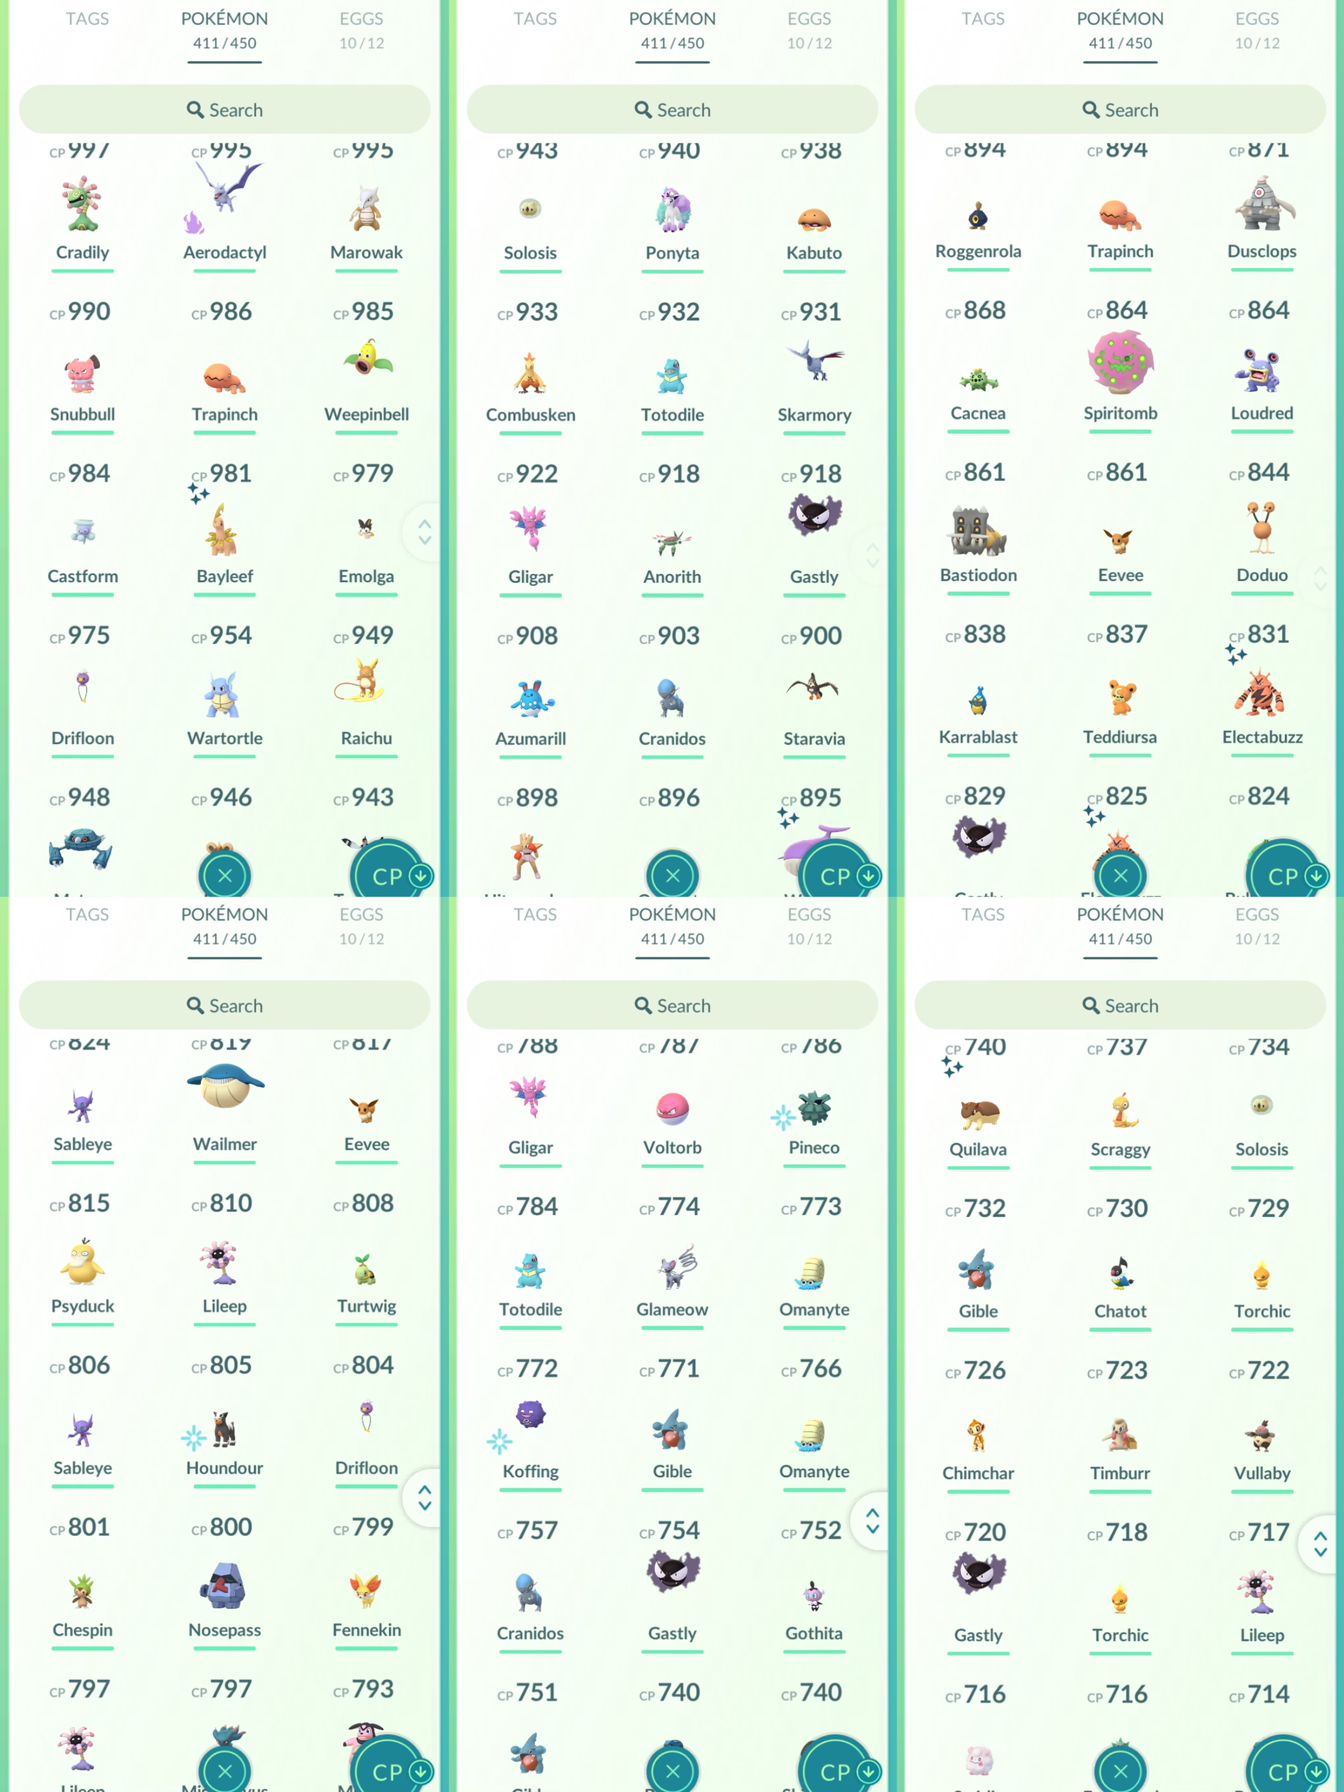 lvl34,have 13 Legendary,28 Shiny,have many nice high CP pokemons,have 100IV Dragonite,N8198